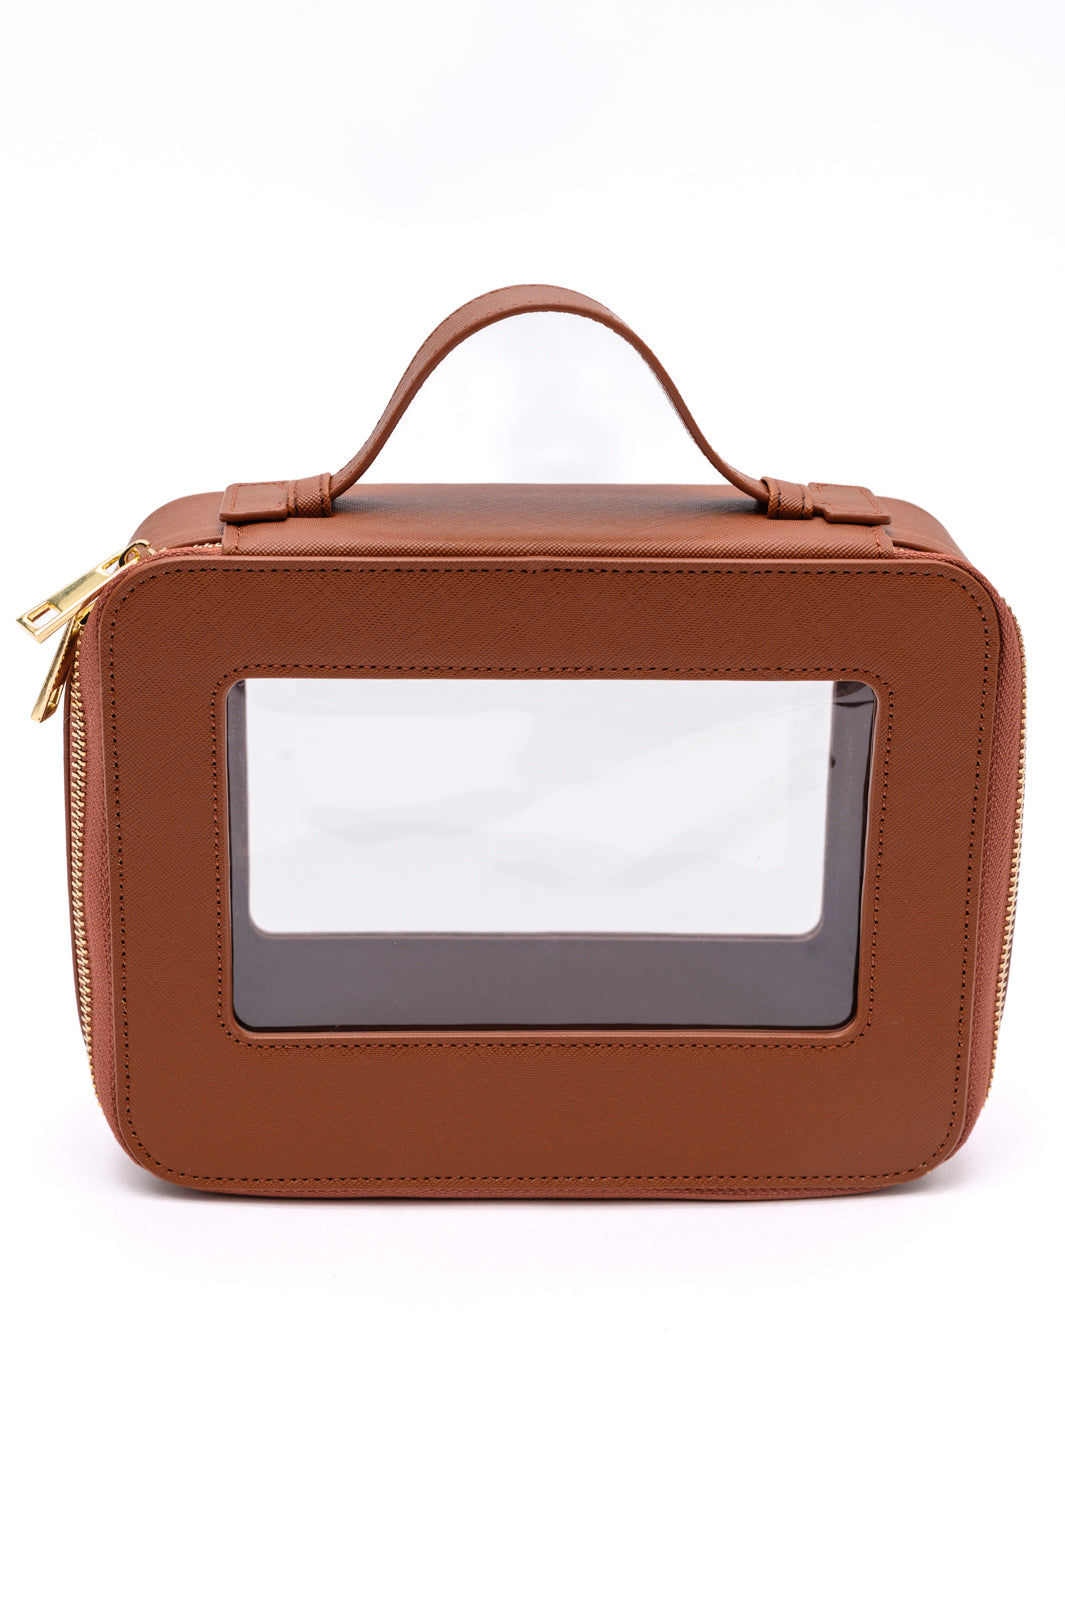 Travel Cosmetic Case | Camel